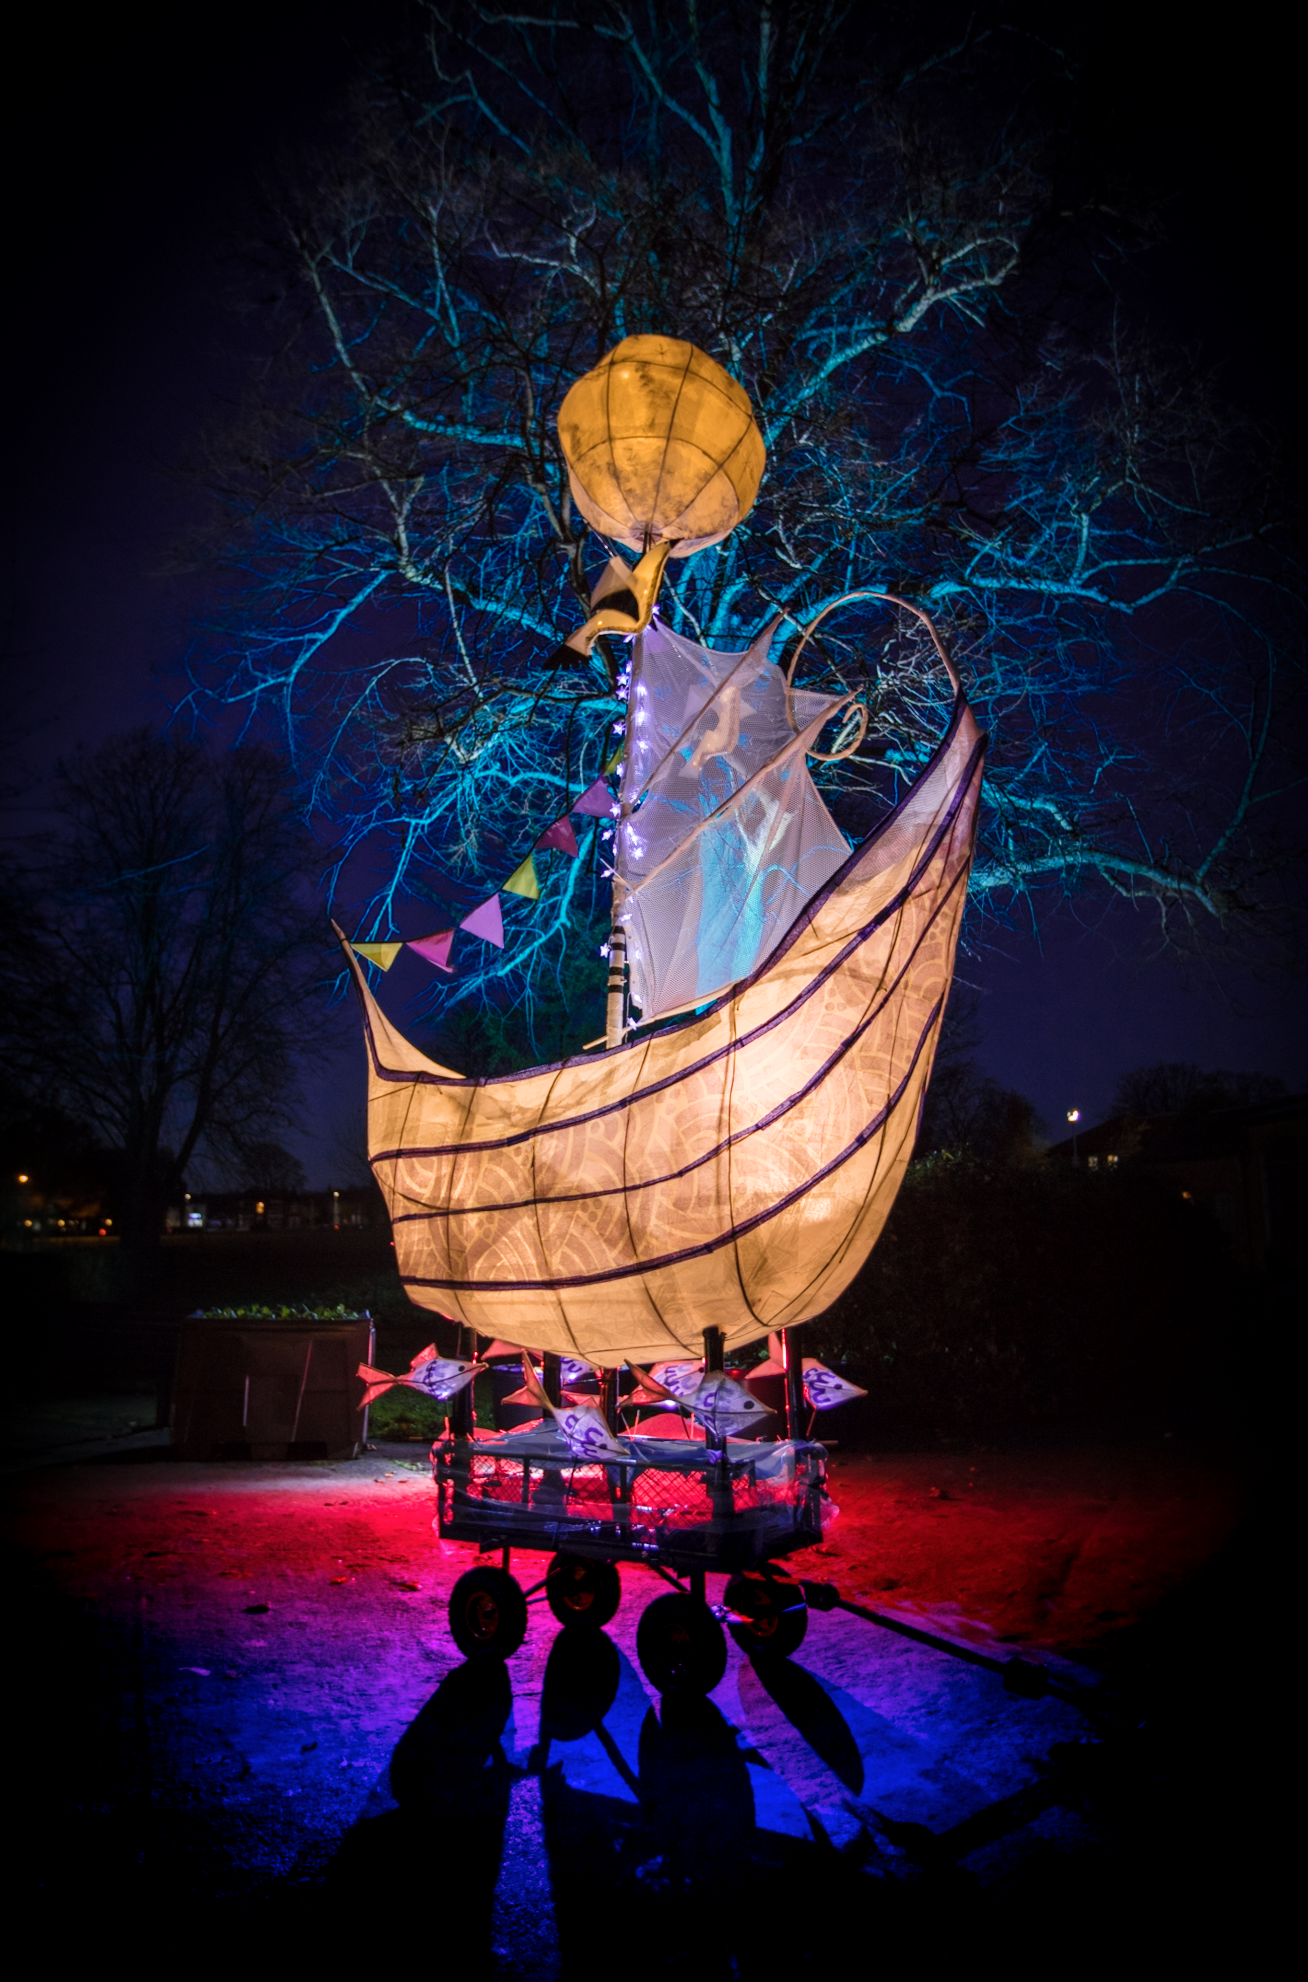 Boat of hope and dreams made for Illuminate 2017 photo credit Steve Hatton